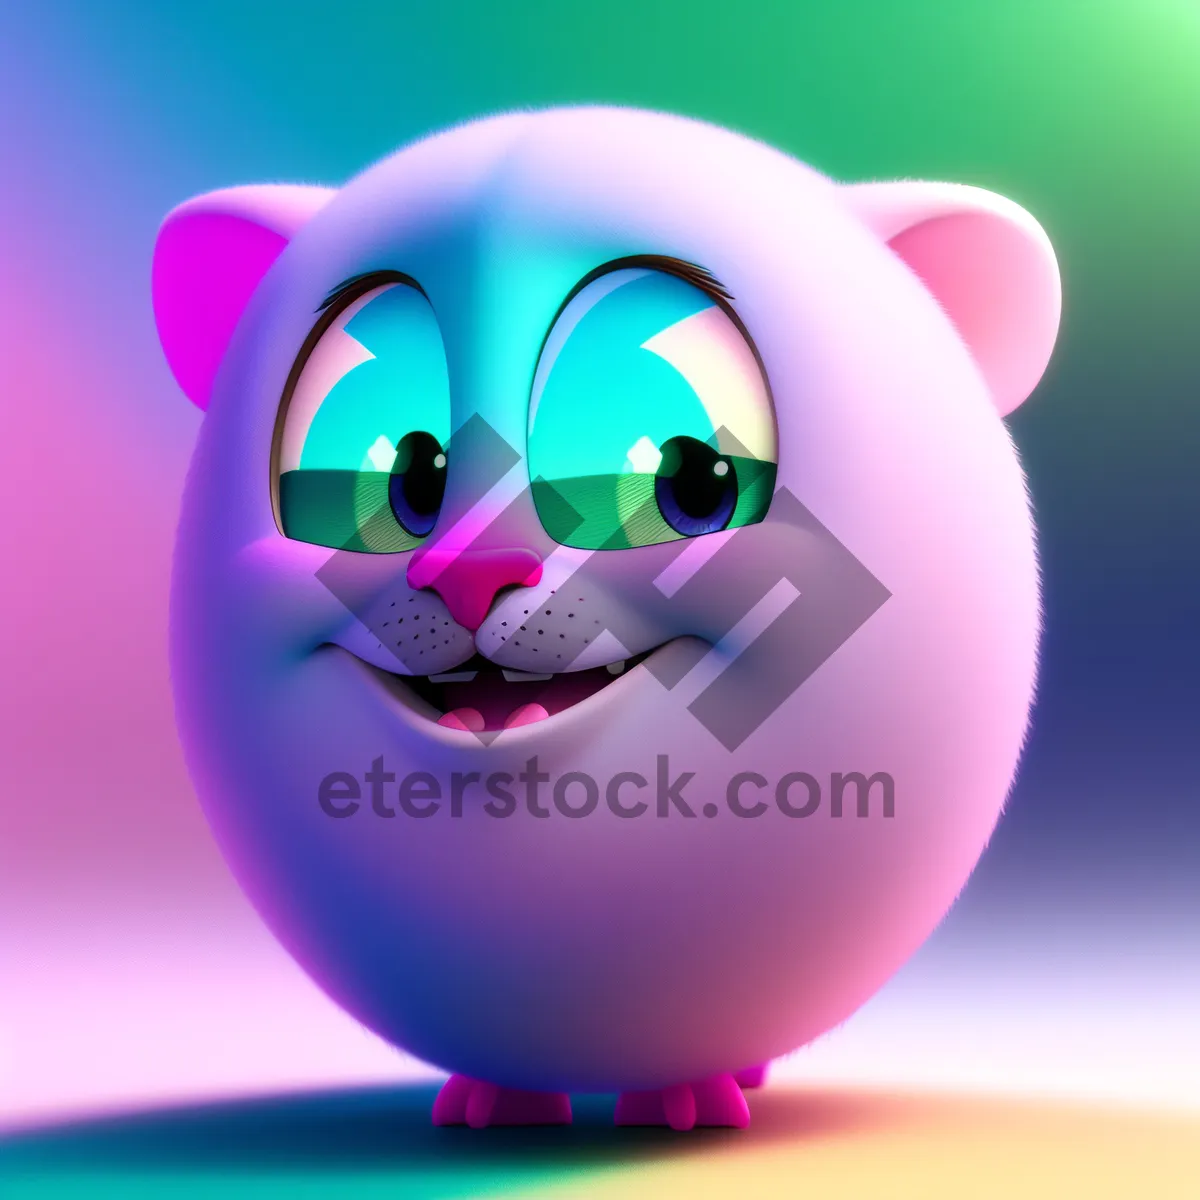 Picture of Hilarious Cartoon Character with a Cheery Smile